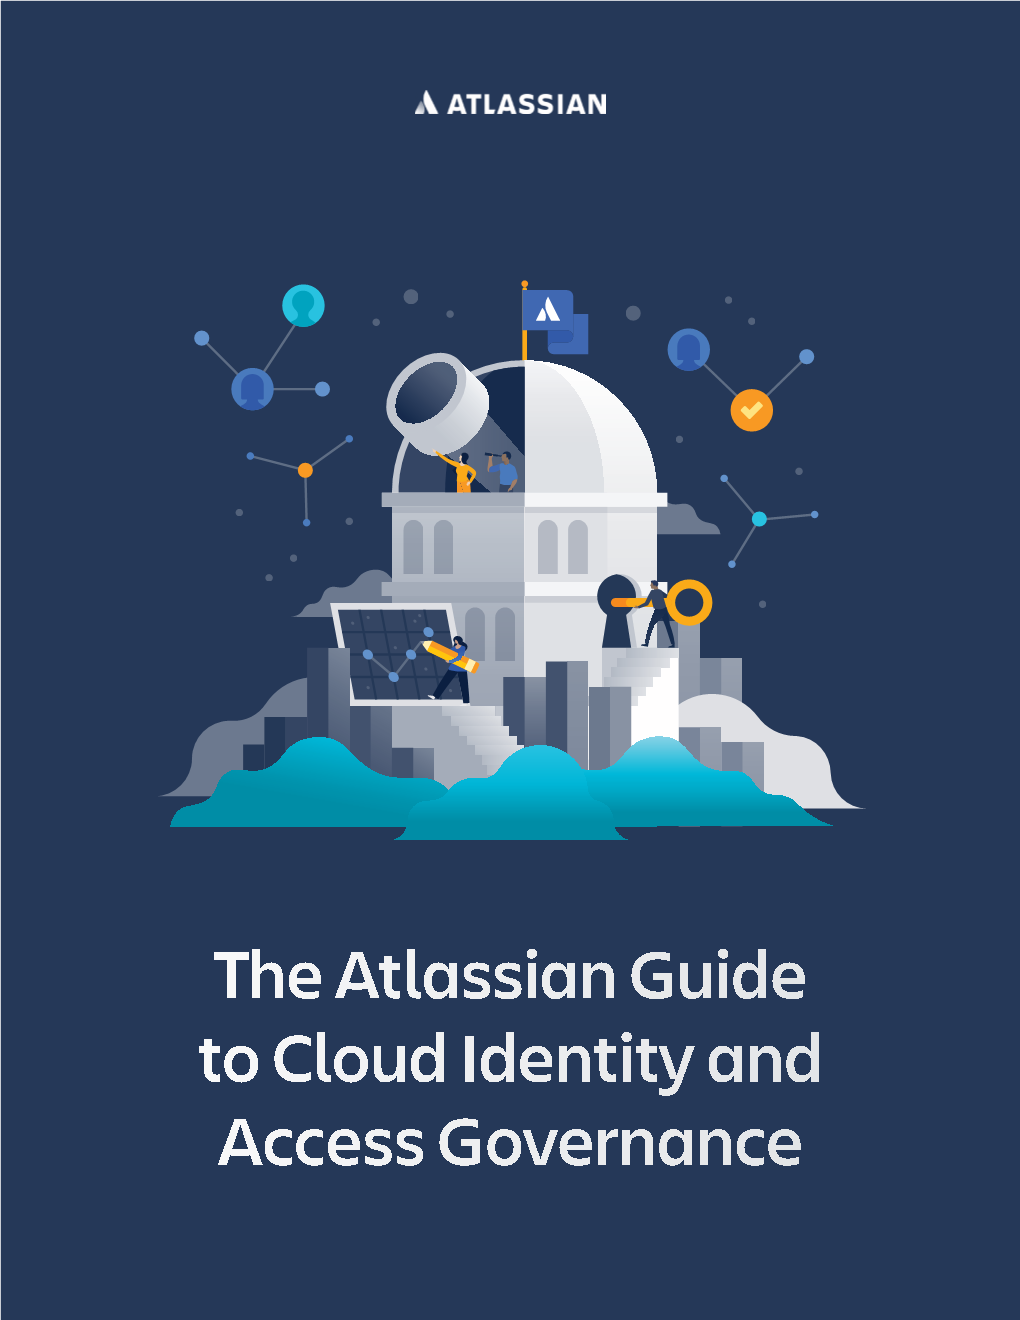 The Atlassian Guide to Cloud Identity and Access Governance Contents